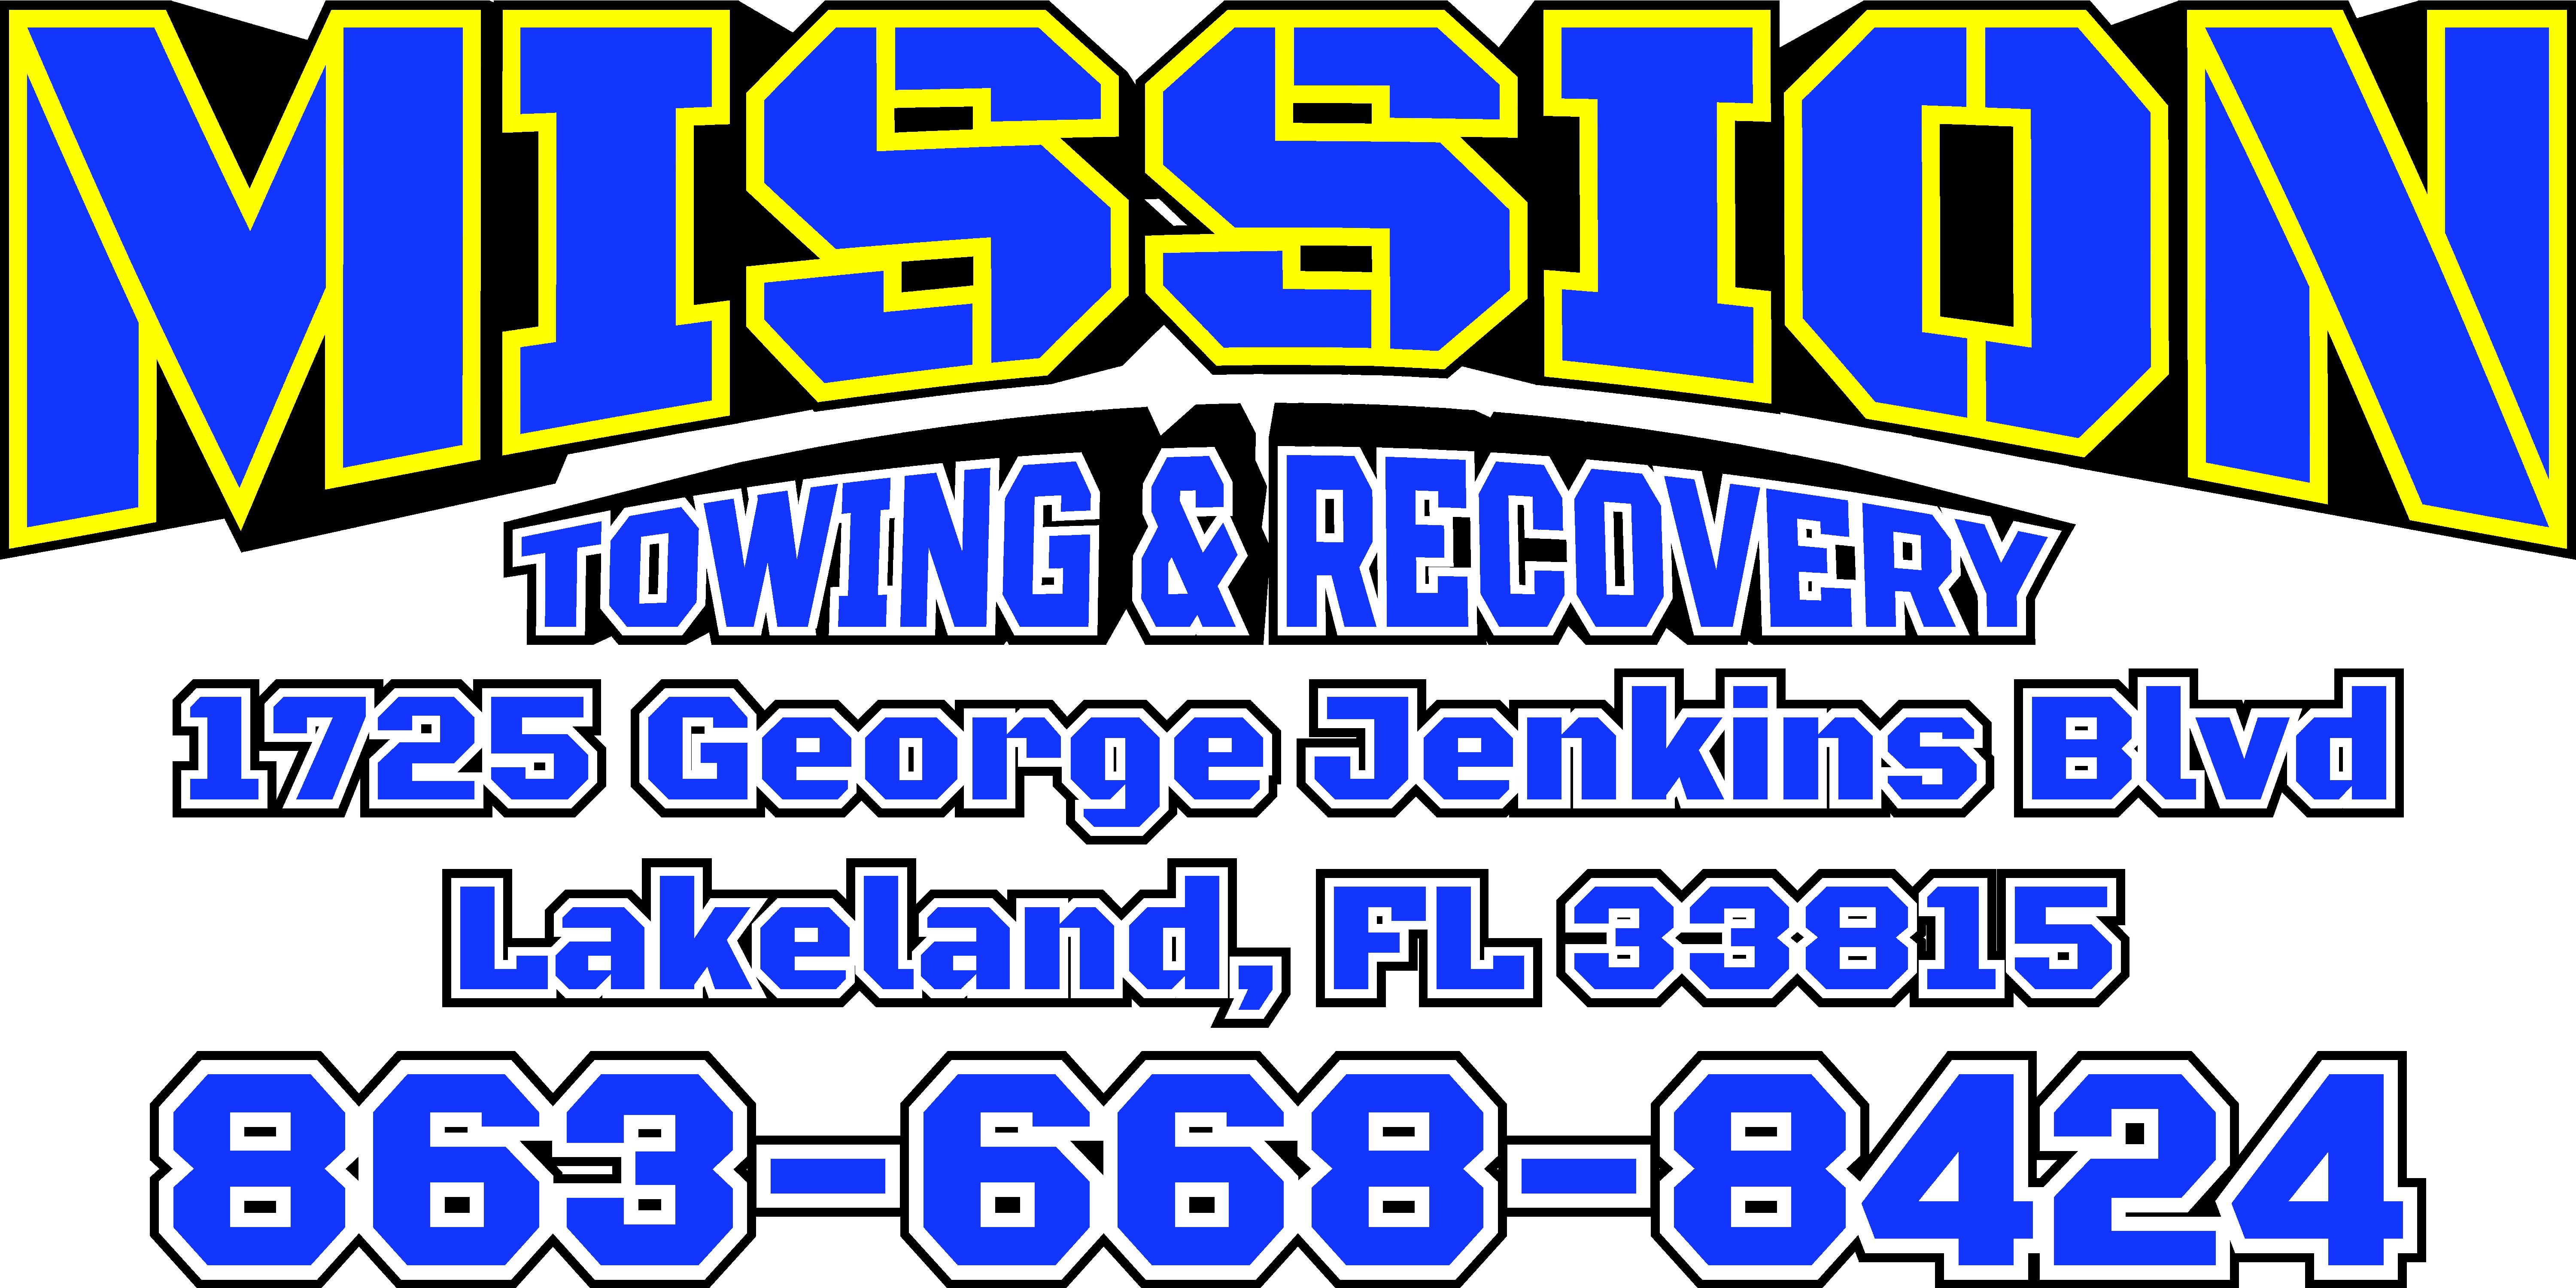 Mission Towing & Recovery LLC and ACS 2 LLC